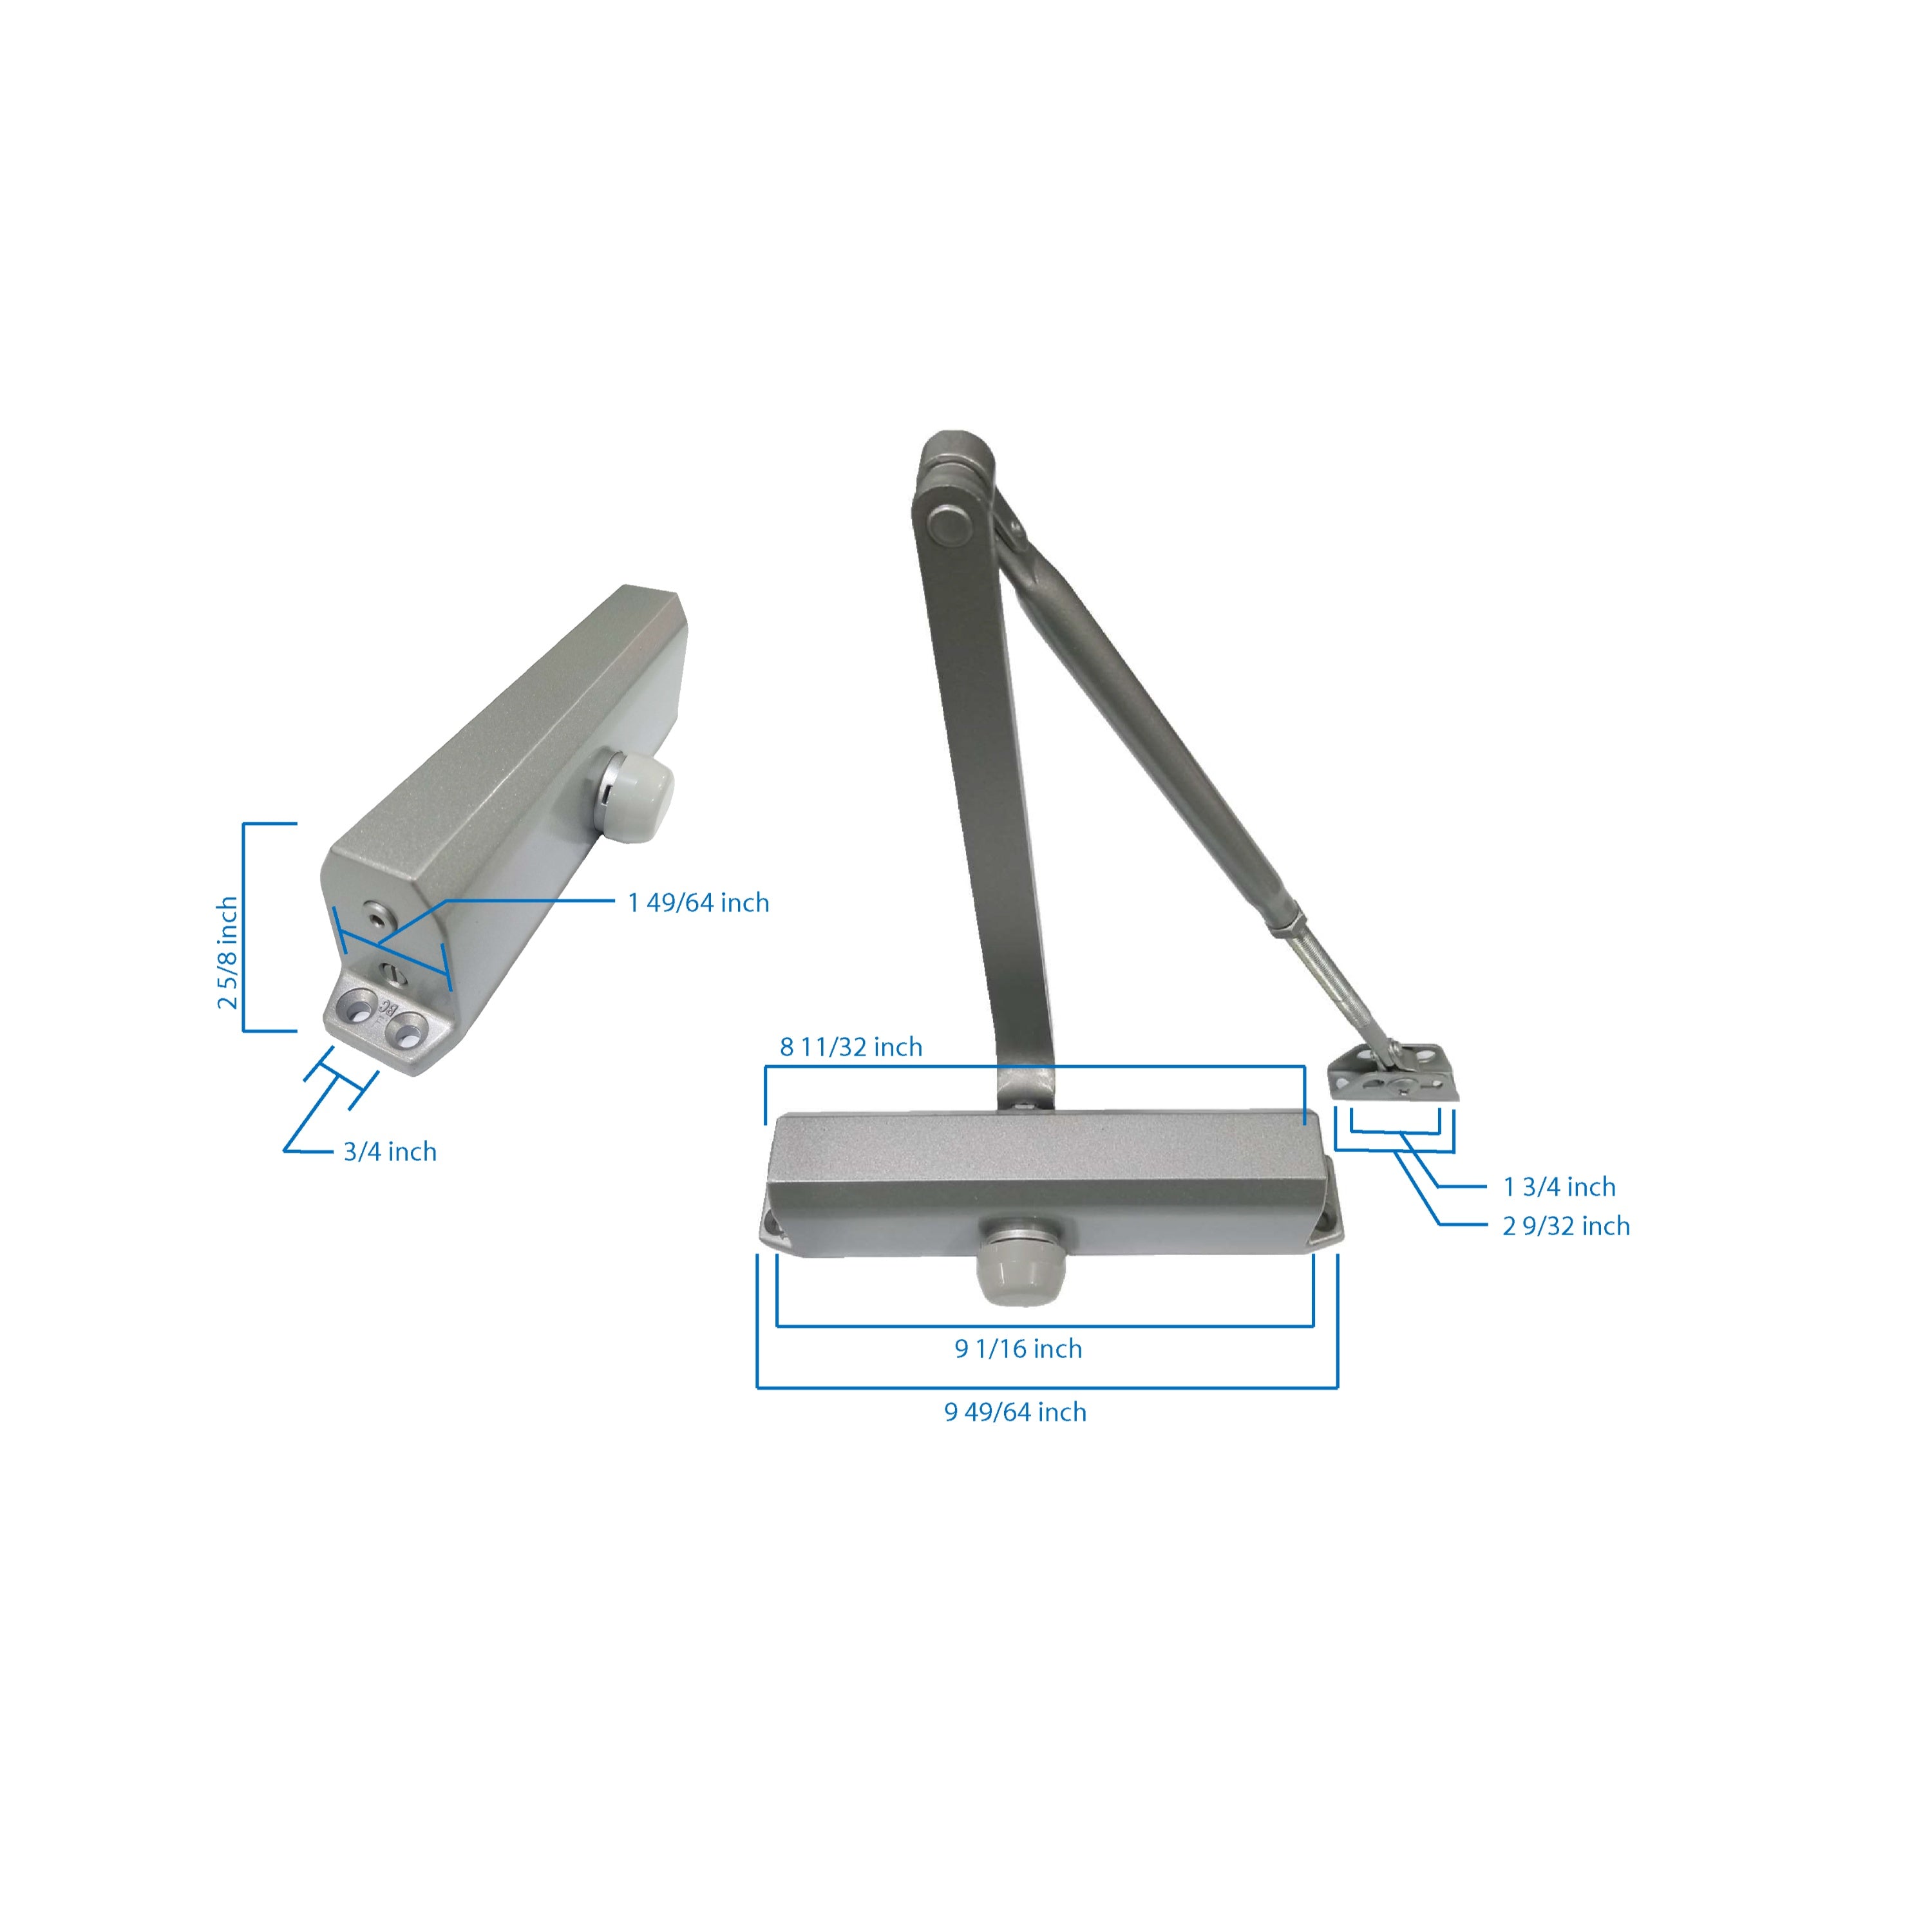 Commercial ADA Grade 1 Door Closer in Aluminum with Adjustable Spring Tension Sizes 1-4 (w/Cover, PAB and Thru Bolts) -  Pro-Edge HD